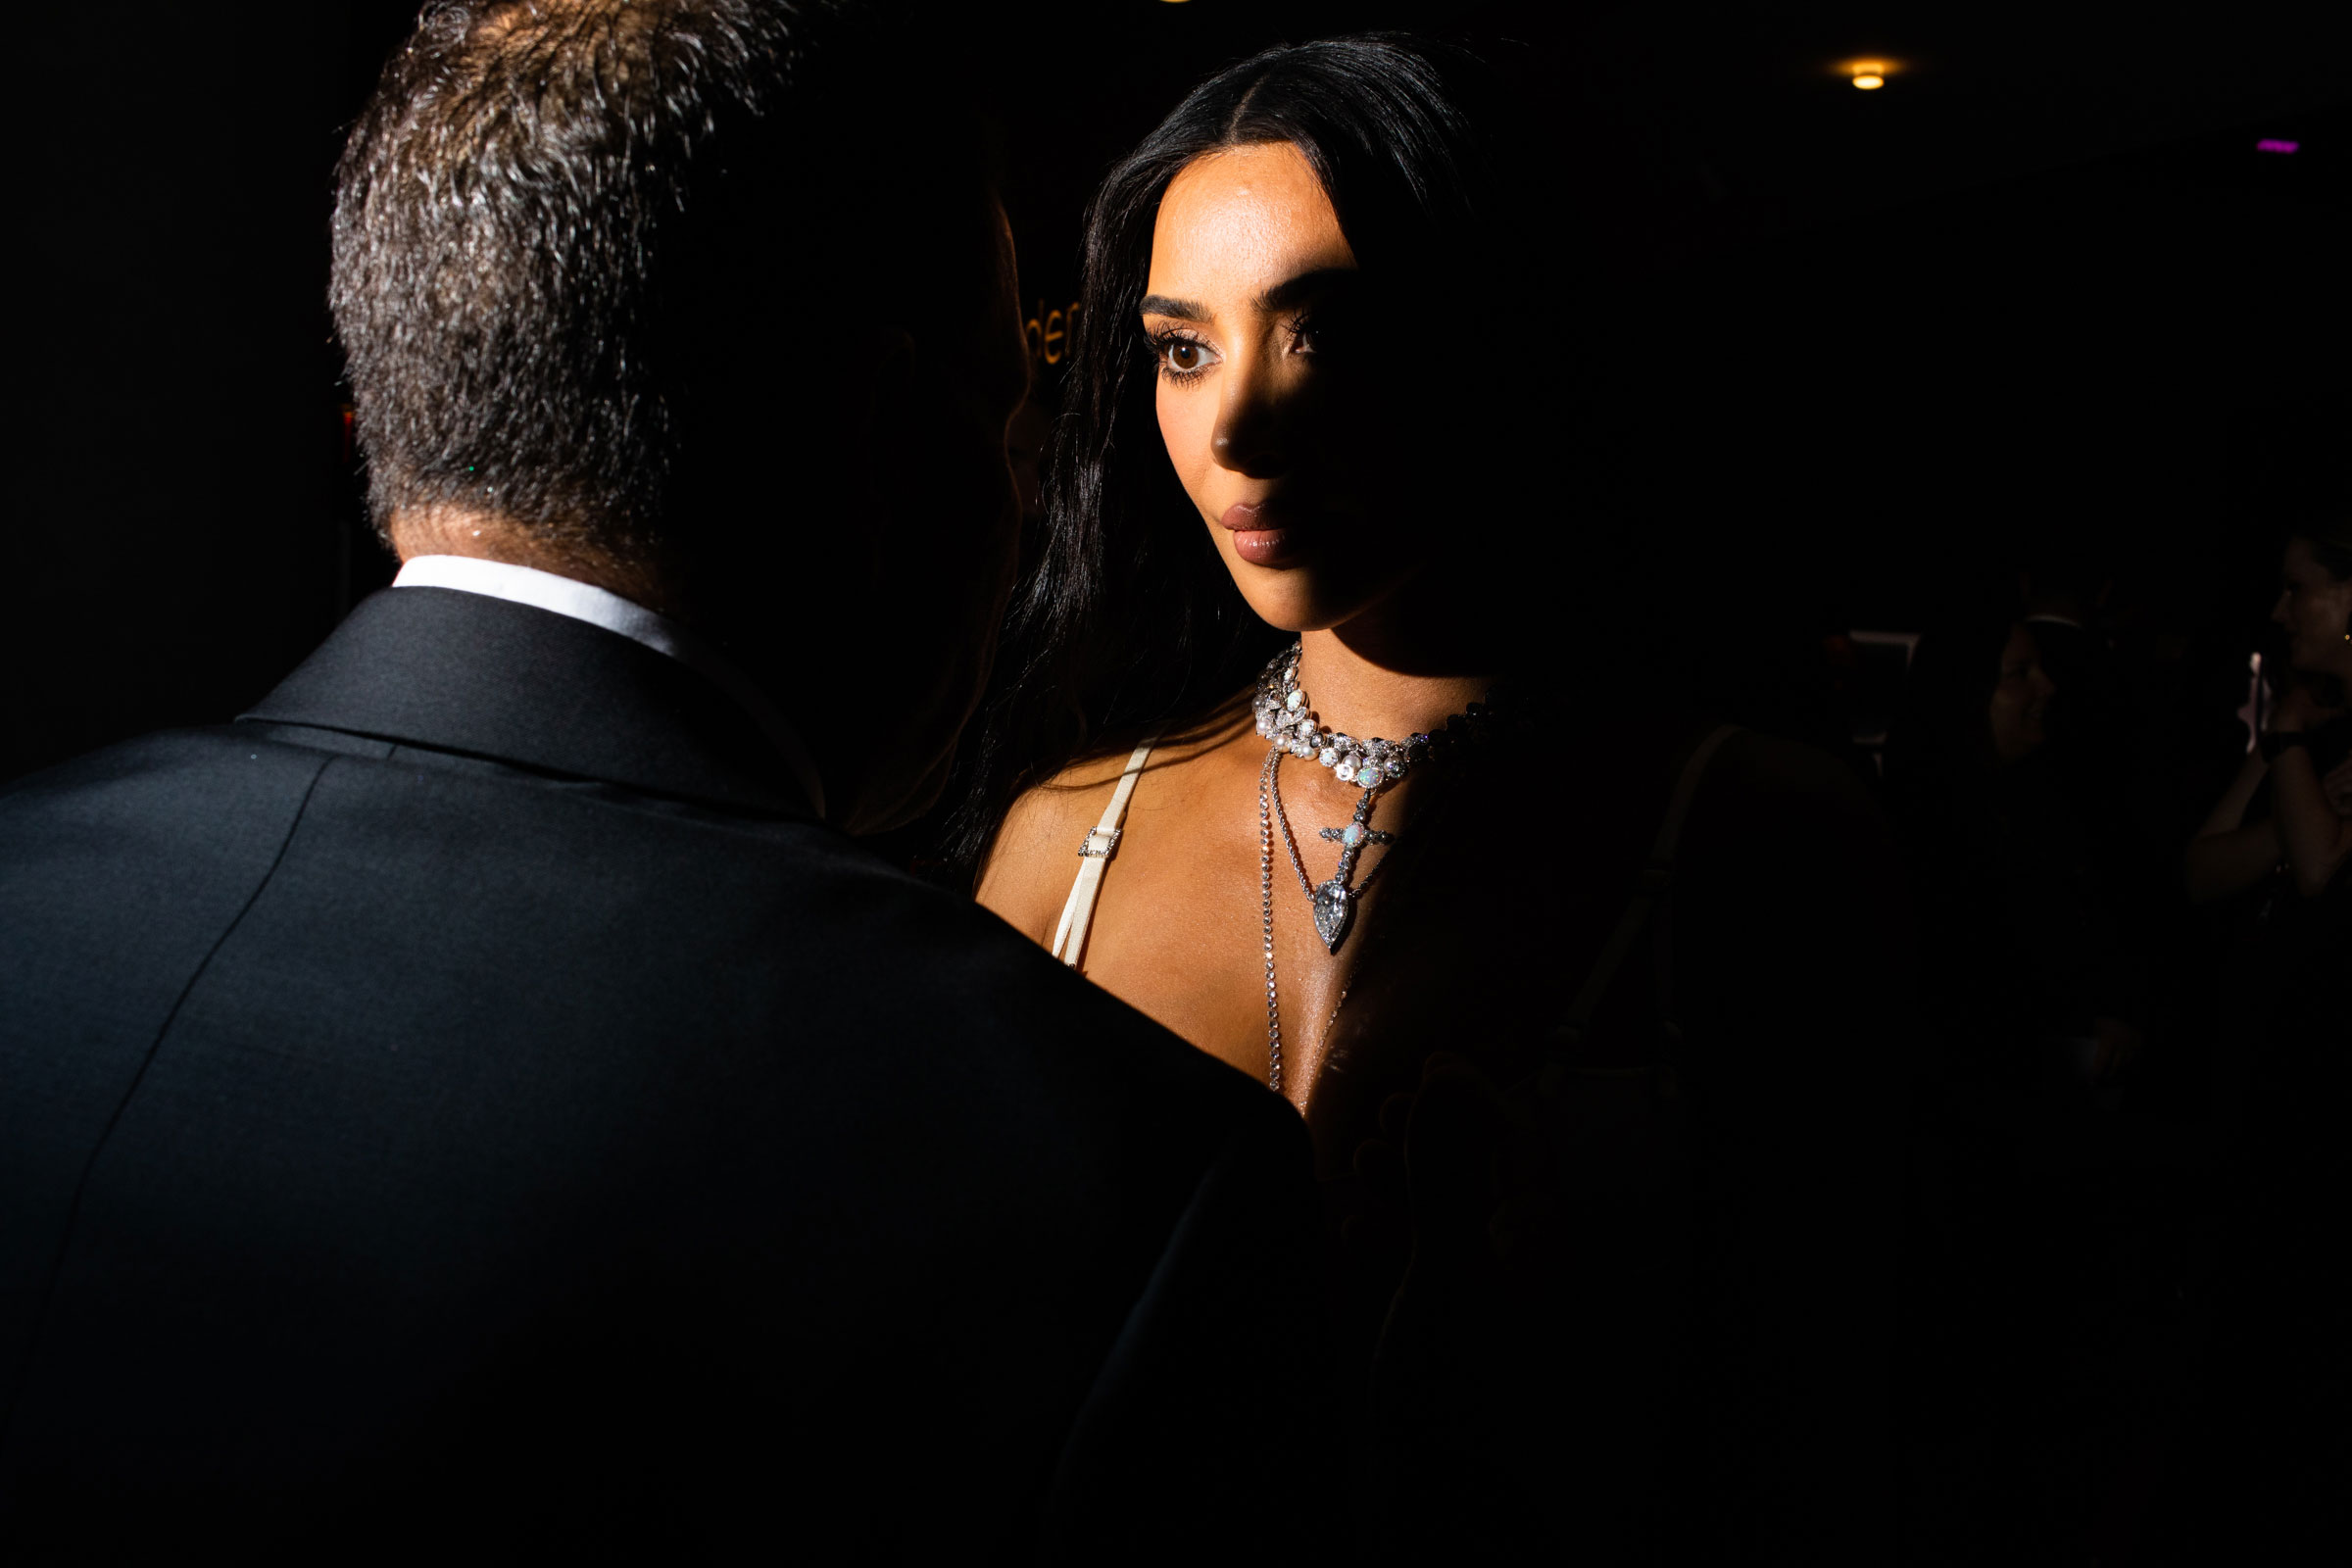 Kim Kardashian attends the TIME 100 Gala at Jazz at Lincoln Center in New York City, on April 26, 2023. (Landon Nordeman for TIME)